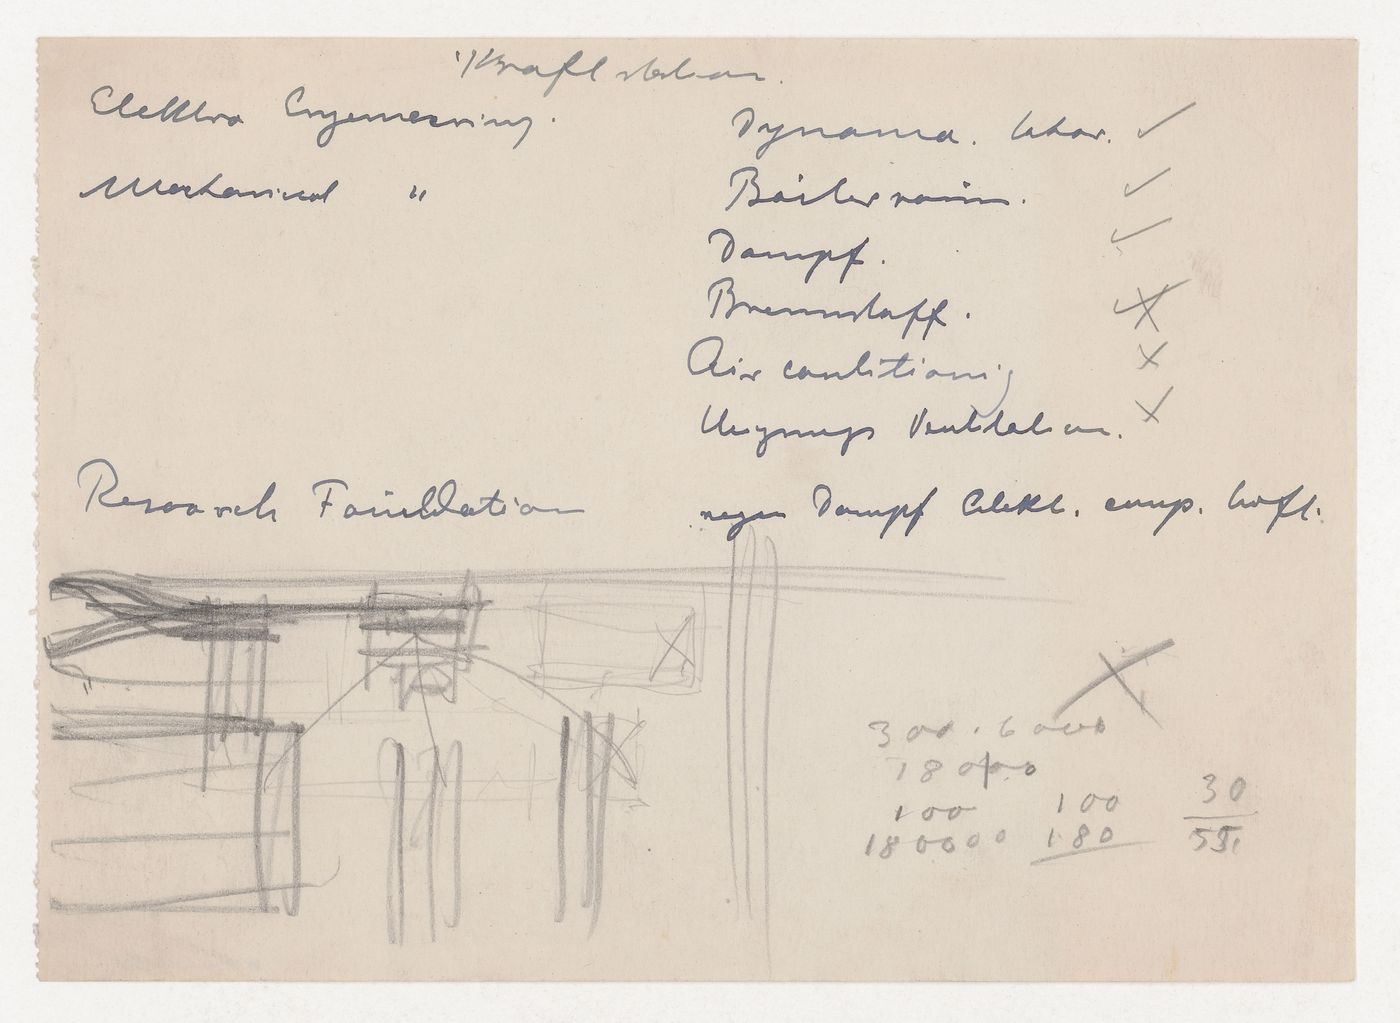 Notes for various campus facilities with calculations and an unidentified sketch for Illinois Institute of Technology